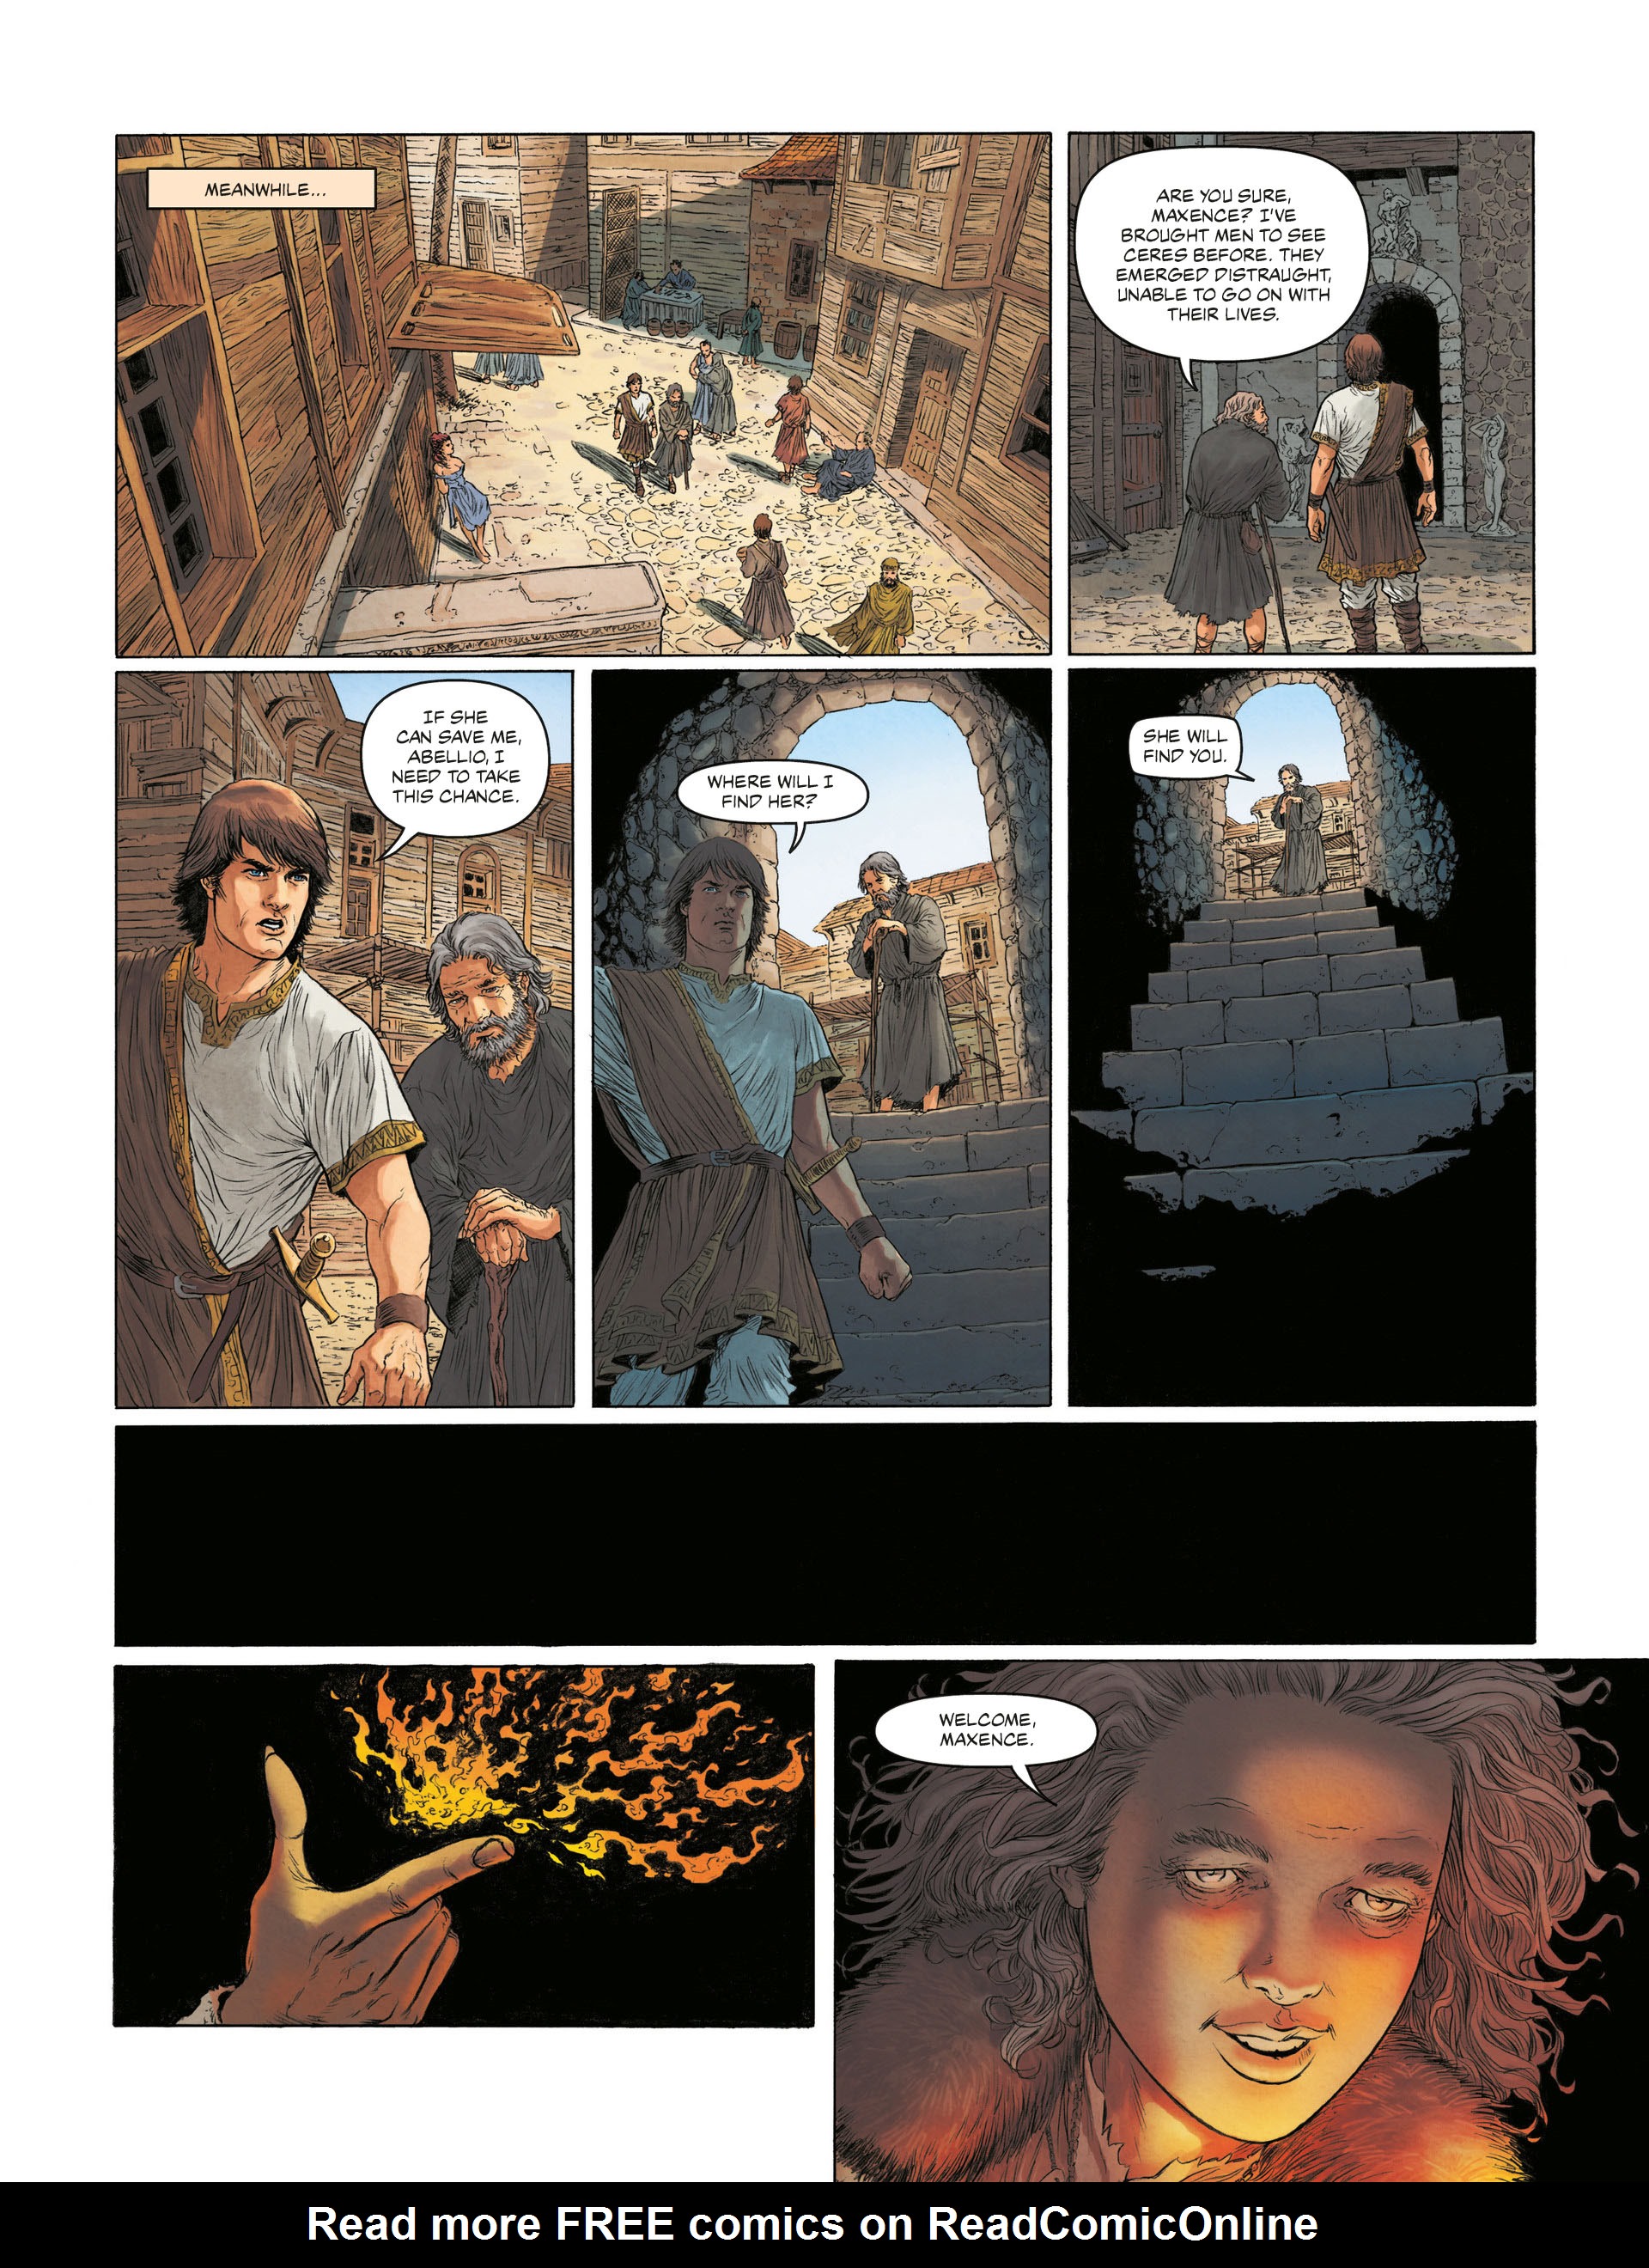 Read online Maxence comic -  Issue #2 - 13